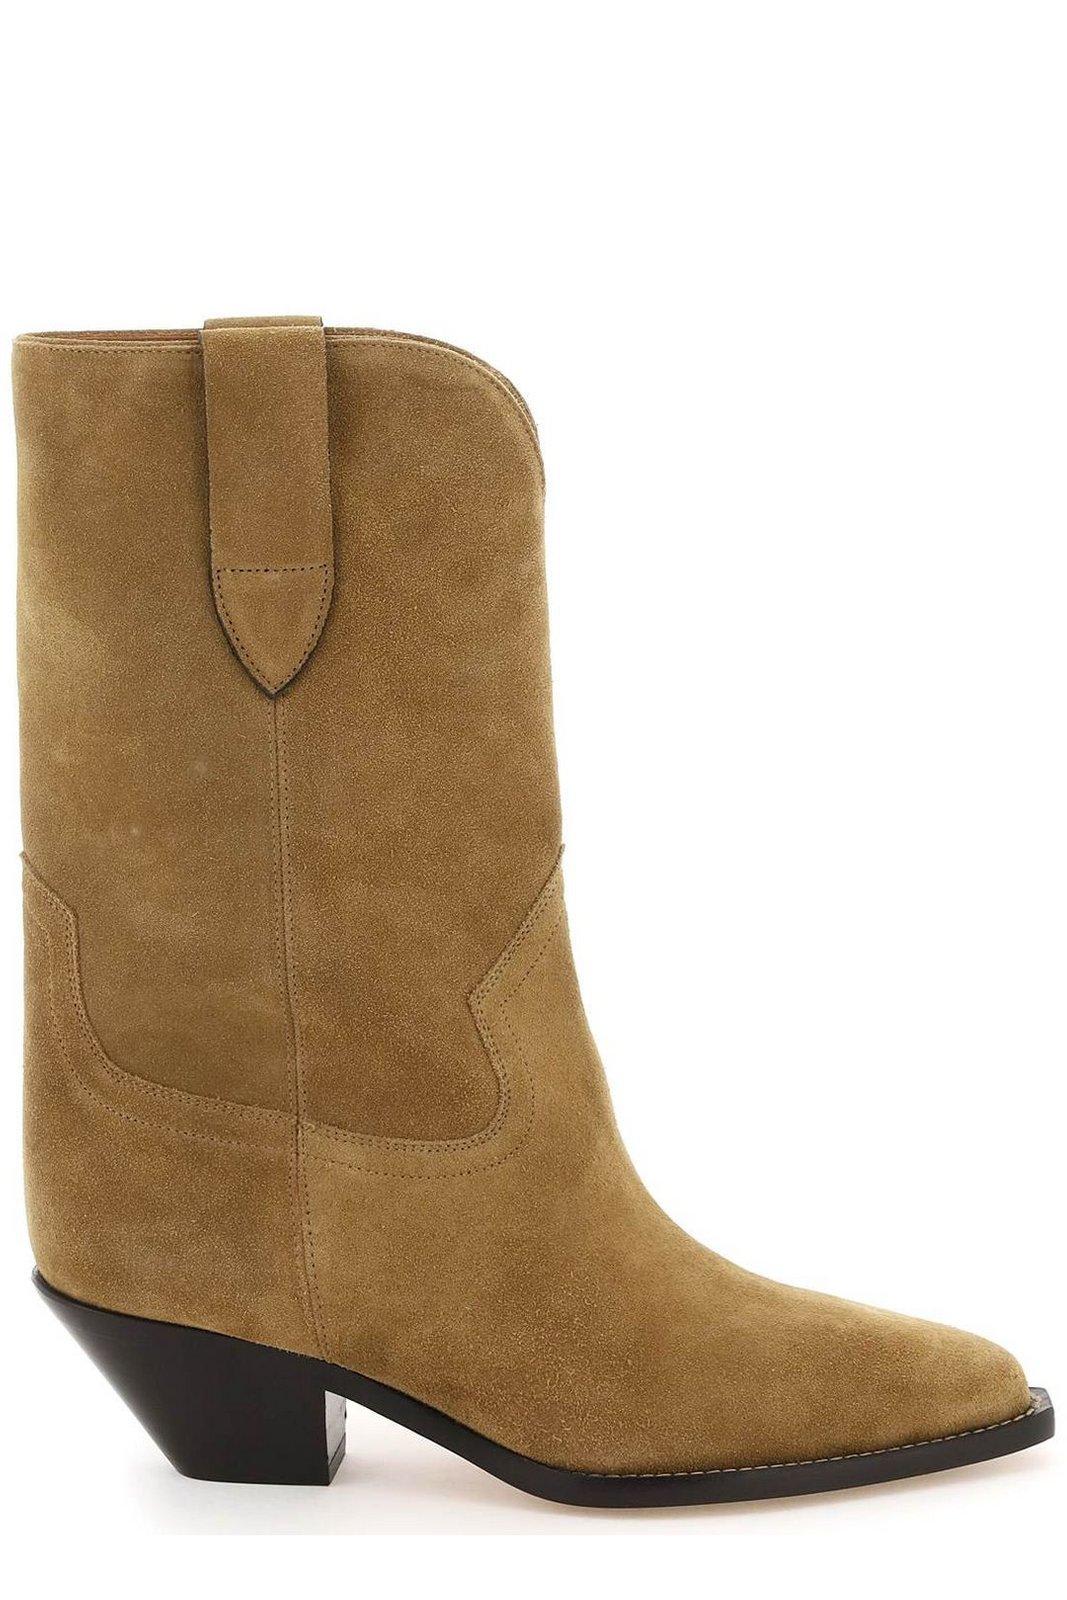 ISABEL MARANT DUERTO POINTED TOE BOOTS